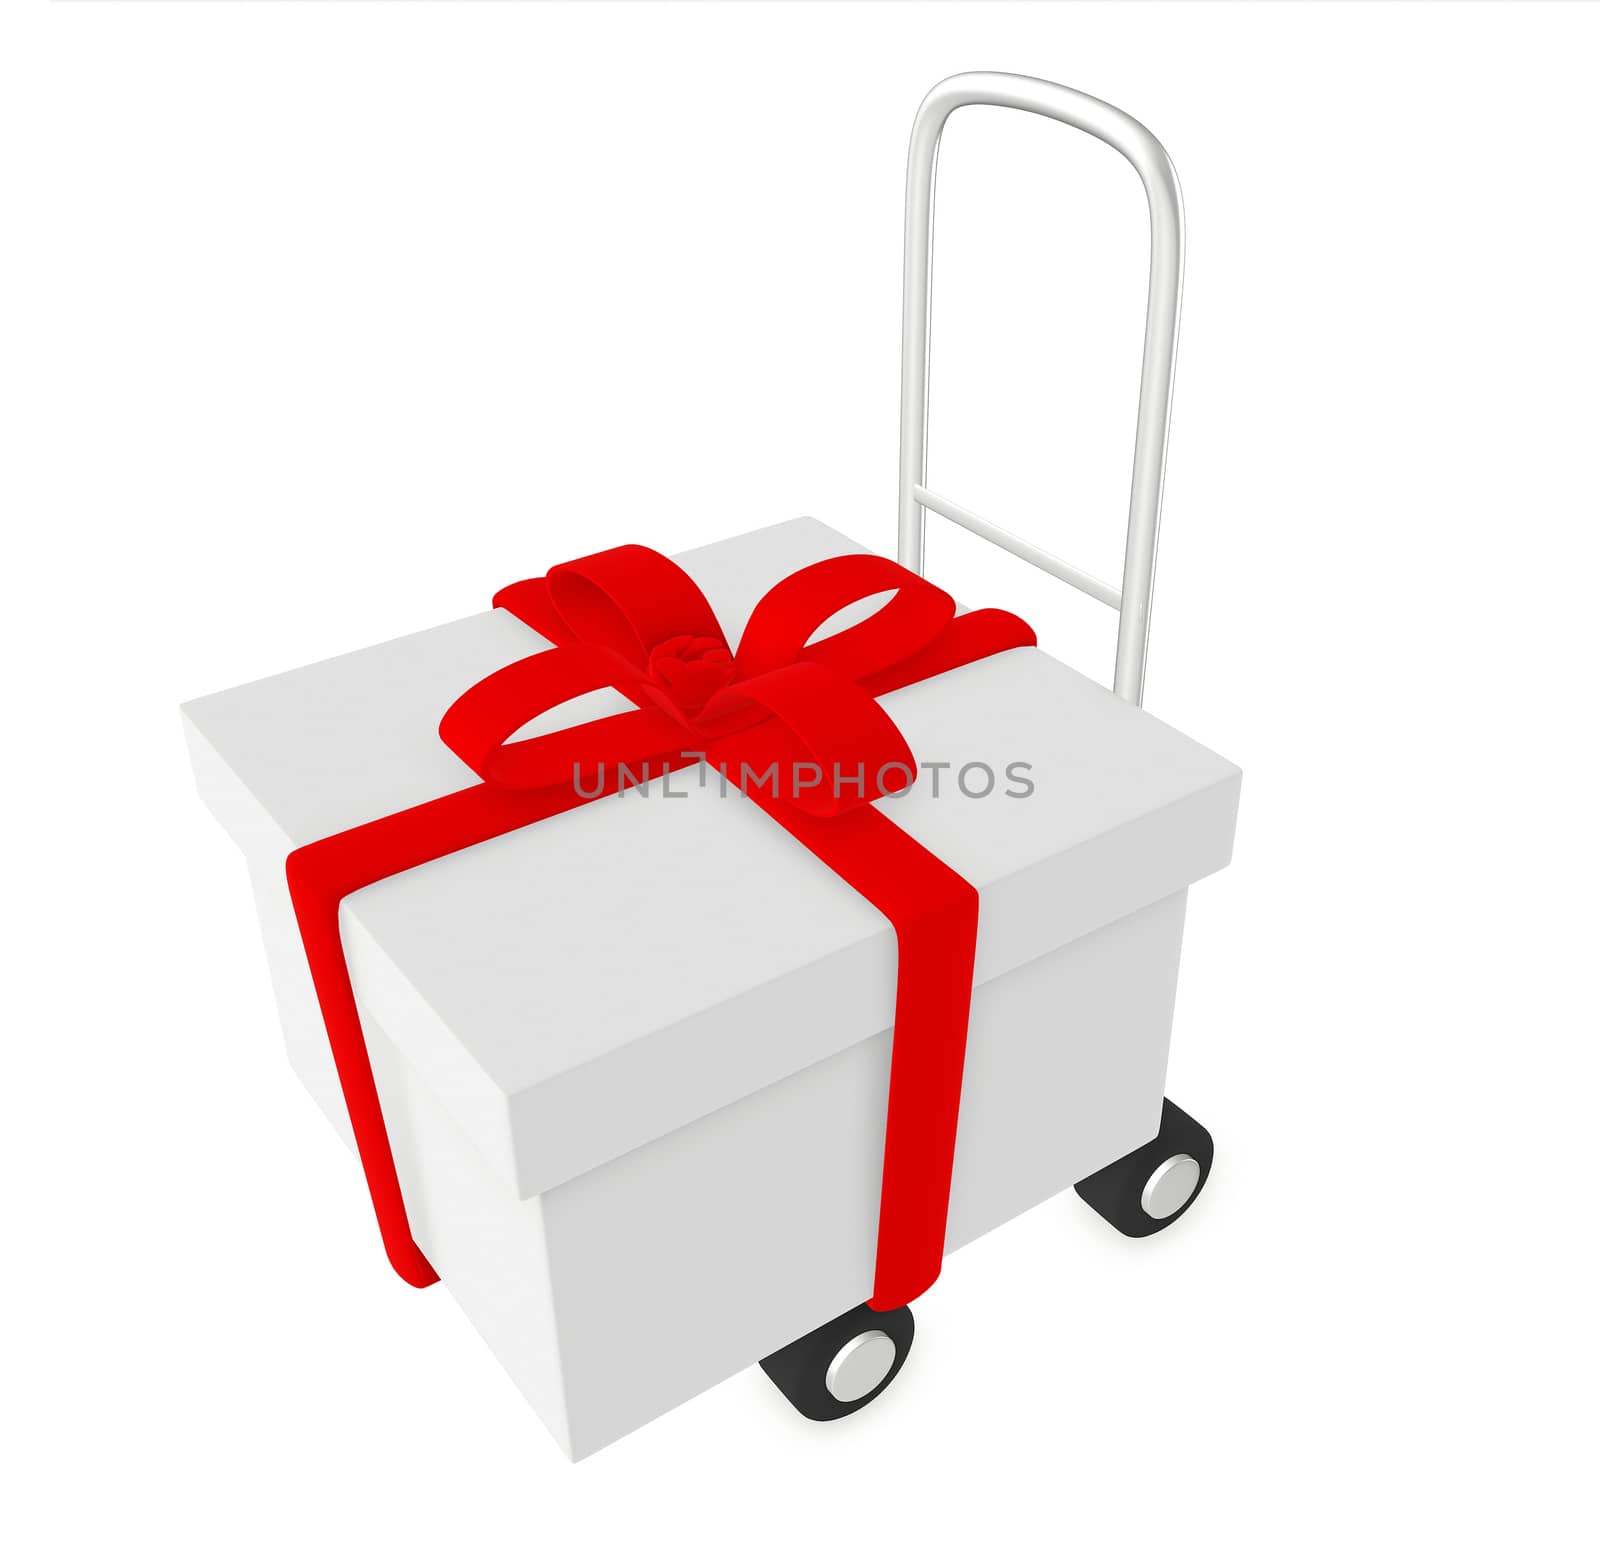 trolley and ribbon wrapped gift in it by qualityrender